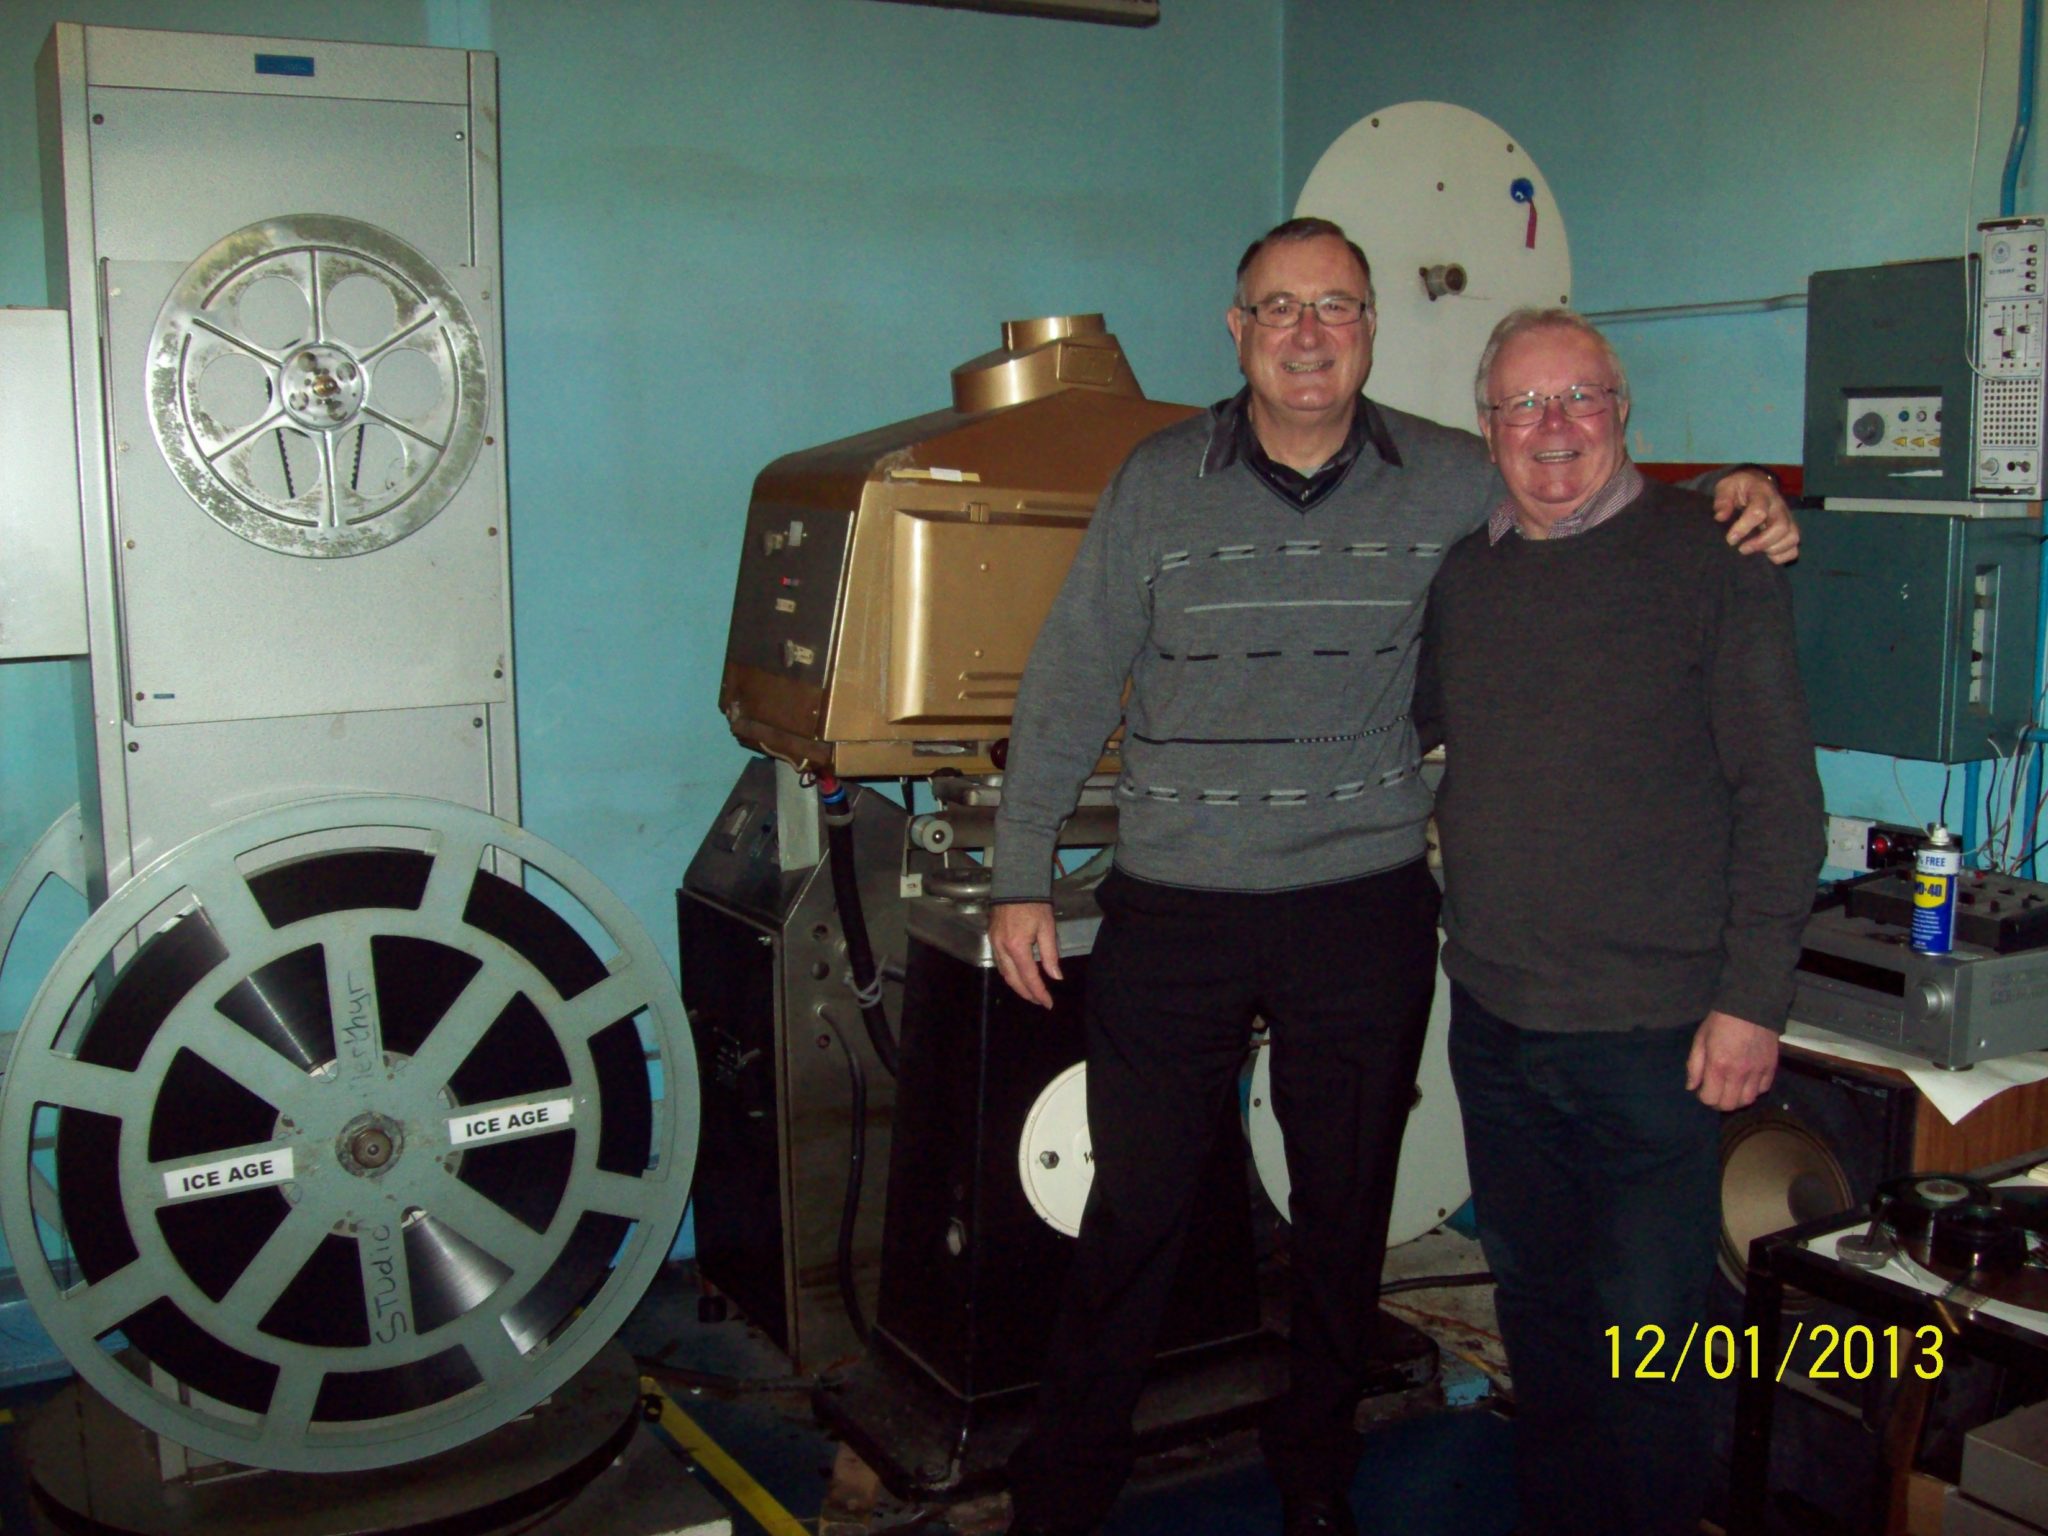 Peter and Bernard Snowball, the previous owner of Scene 123, after showing the final films